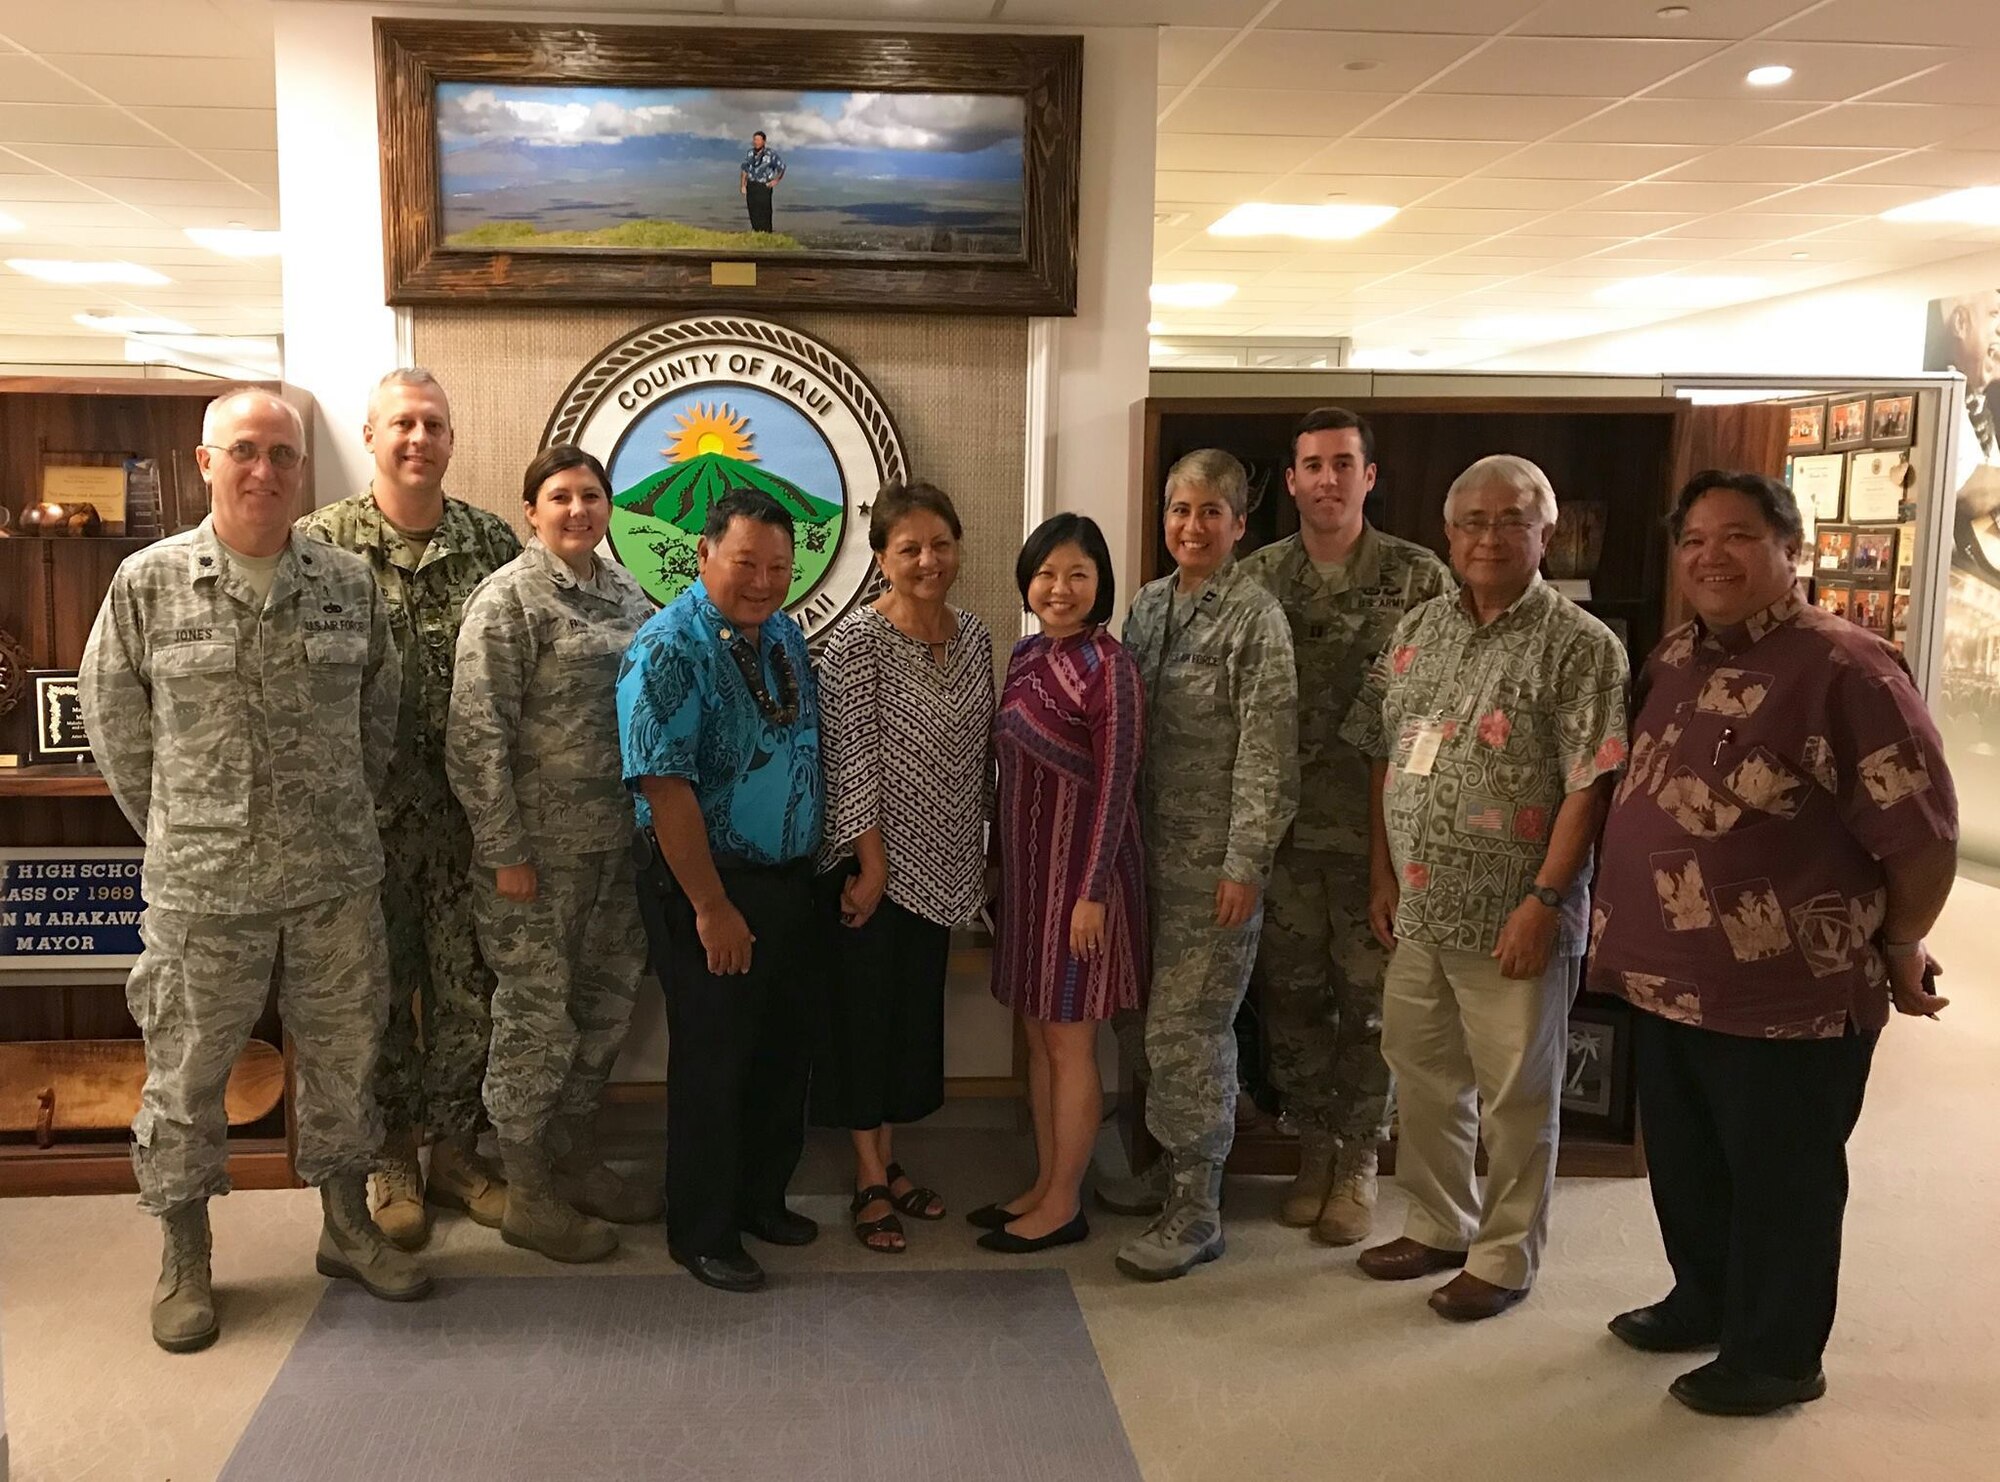 Maui County Mayor Alan Arakawa, fourth from left, stands with military leaders and Maui County officials in June 2018 to plan Tropic Care Maui County 2018. About 350 Guard, Reserve, and active duty military members arrived in Maui, Molokai, and Lanai to set up no-cost healthcare clinics as part of the U.S. military Innovative Readiness Training initiative. 
Military members will provide medical, vision, and dental services at sites in Central Maui, Kihei, Lahaina, Hana, Molokai, and Lanai, August 11-19. The training mission is led by the Air National Guard and supported by members of the Air Force, Army, Navy Reserve, and Marine Corps Reserve. 
Maui County and the Hawaii State Department of Health are partnering with the military for this mission, working closely with community members to organize the clinics. (Courtesy photo)